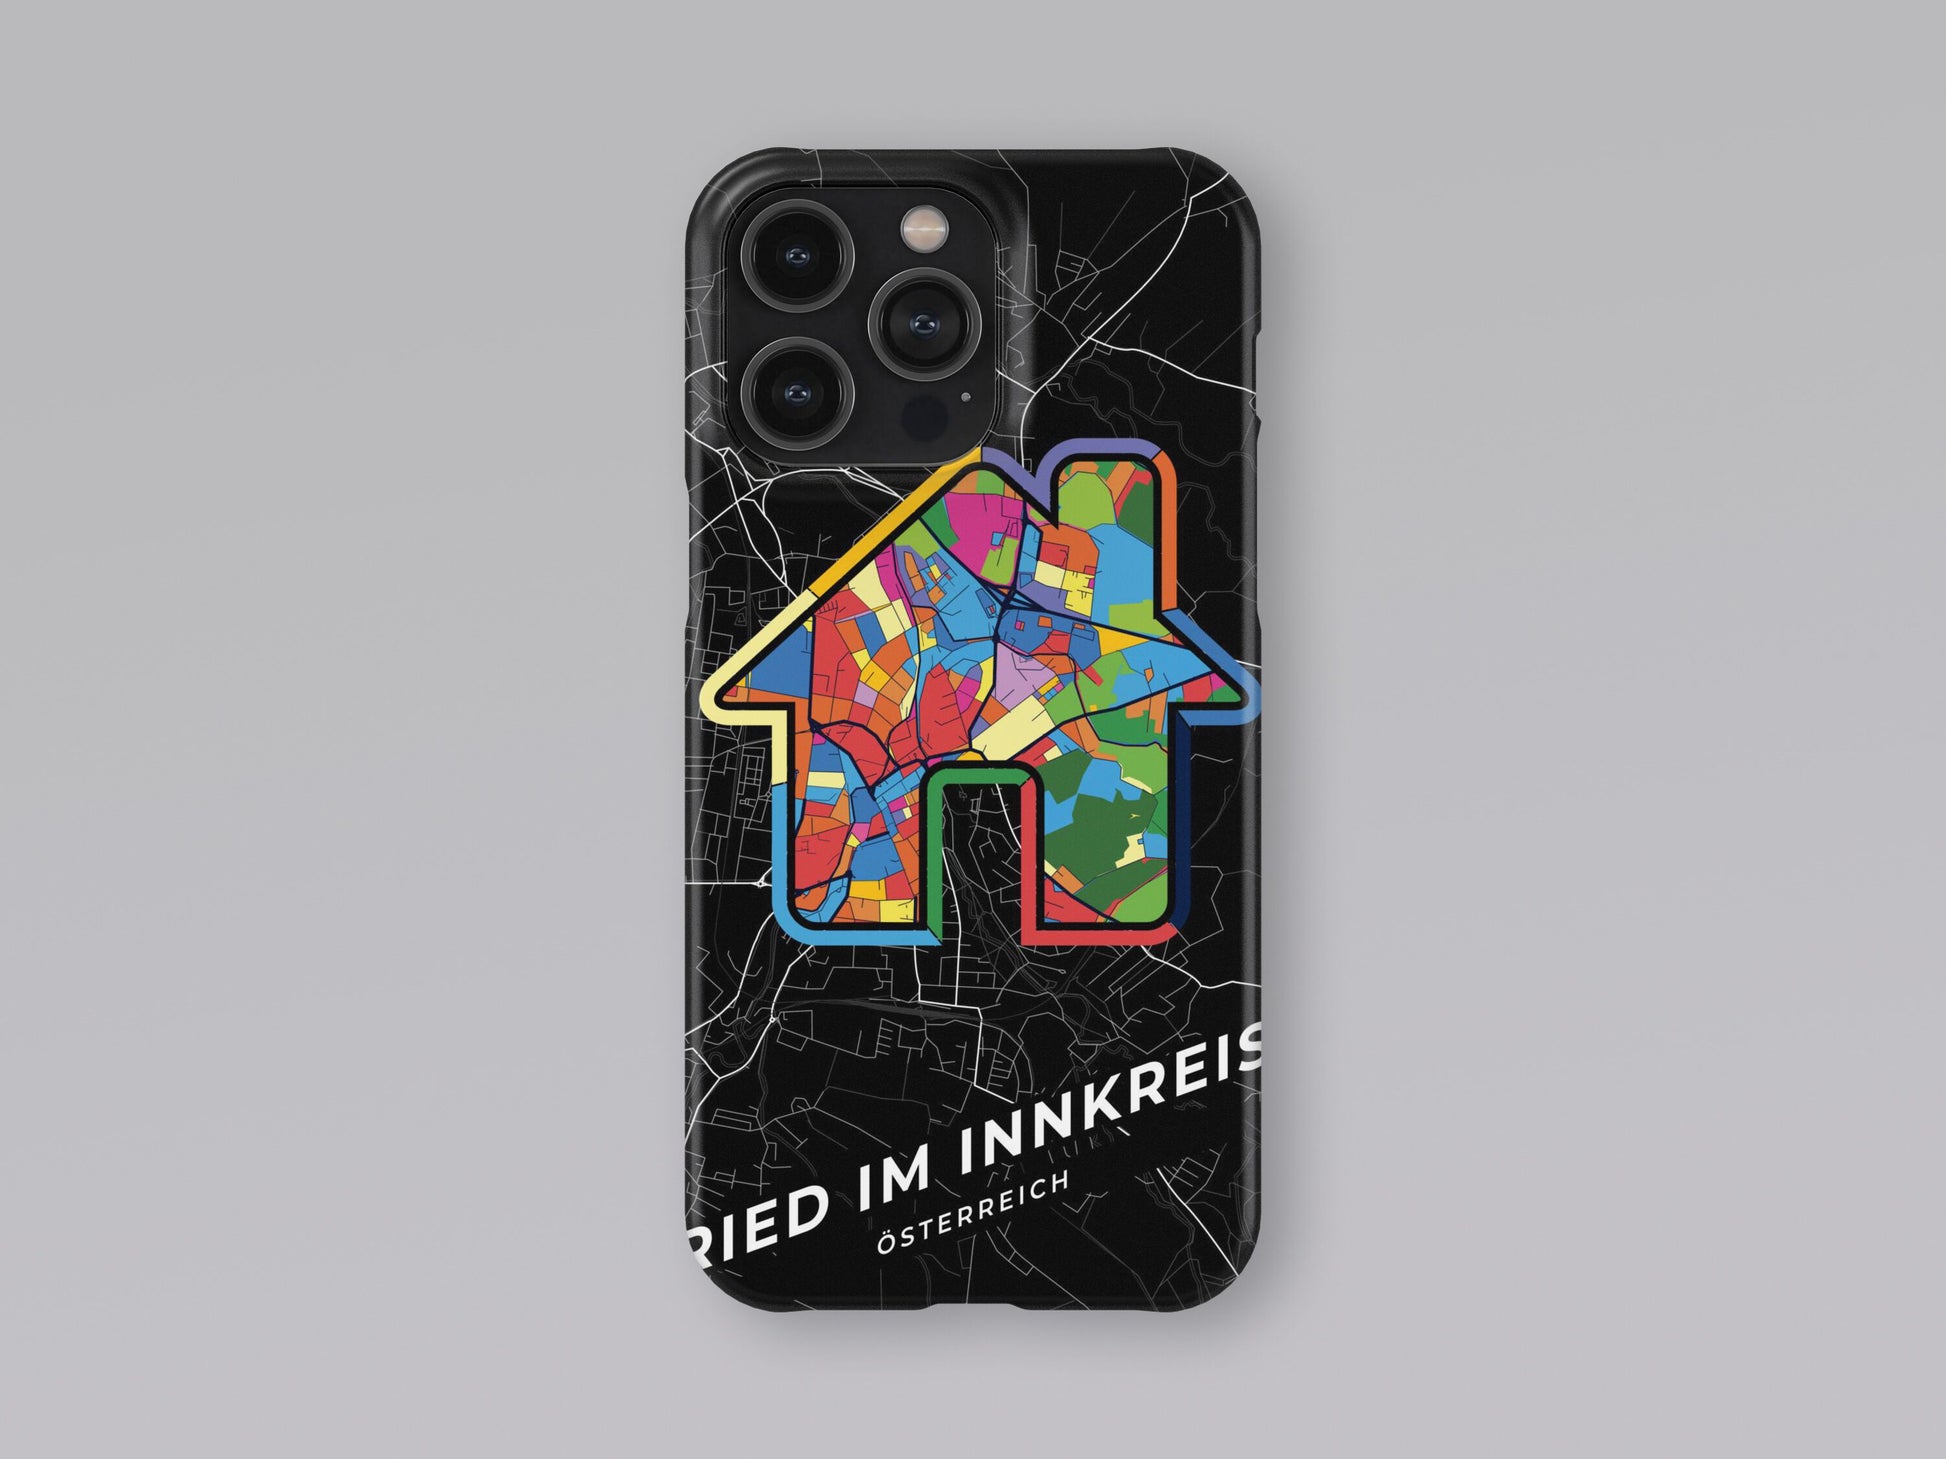 Ried Im Innkreis Österreich slim phone case with colorful icon. Birthday, wedding or housewarming gift. Couple match cases. 3